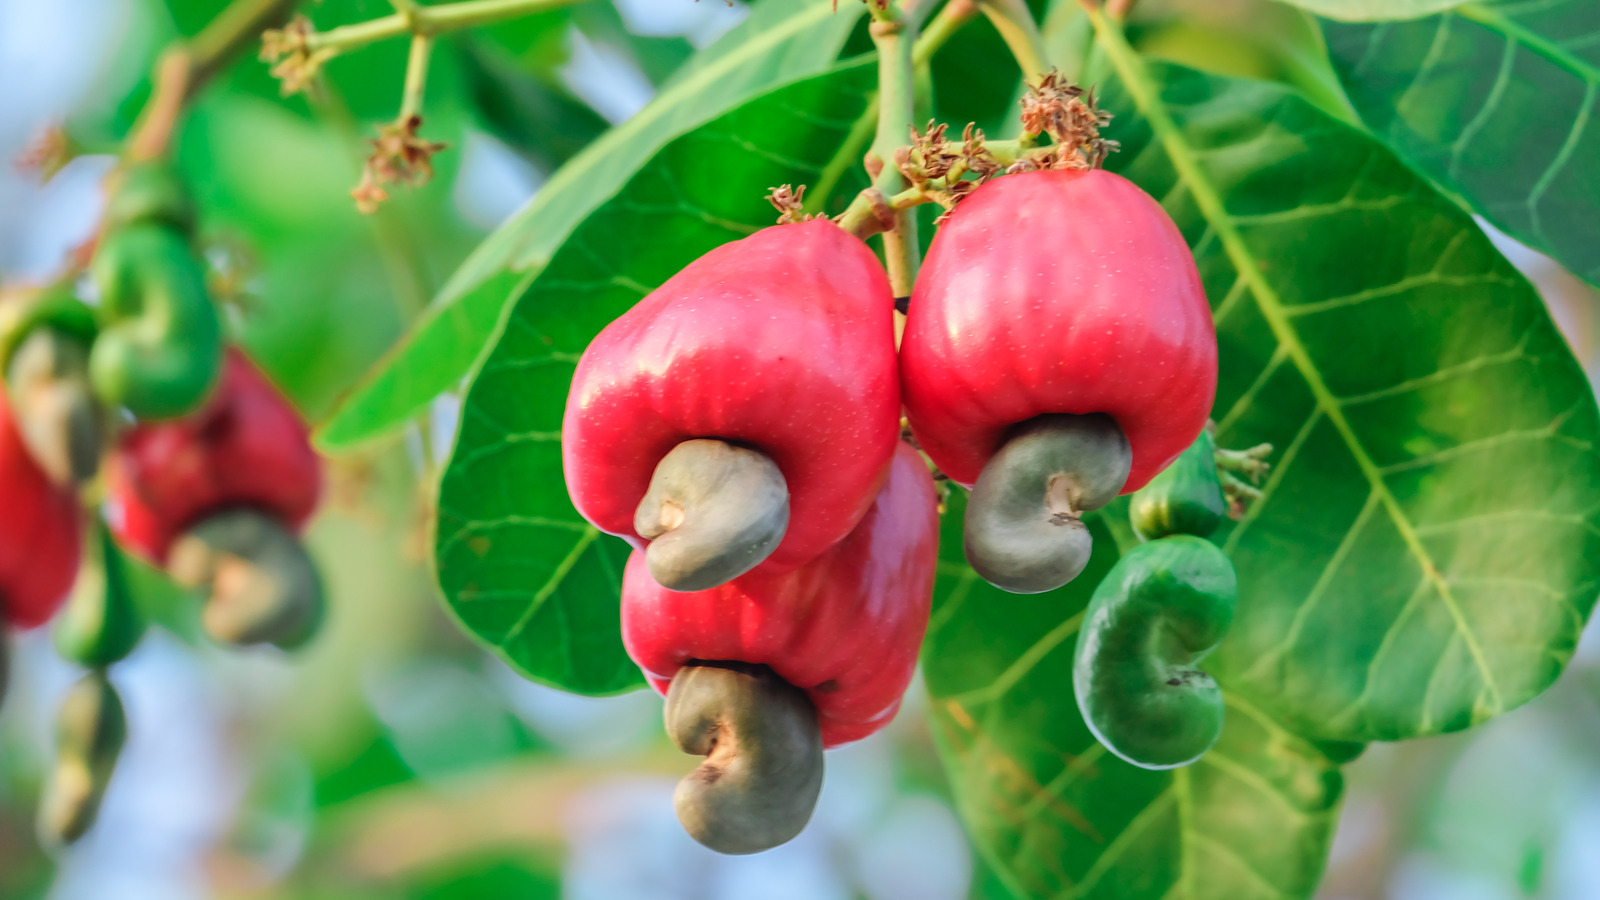 What Is A Cashew Apple And What Does It Taste Like?